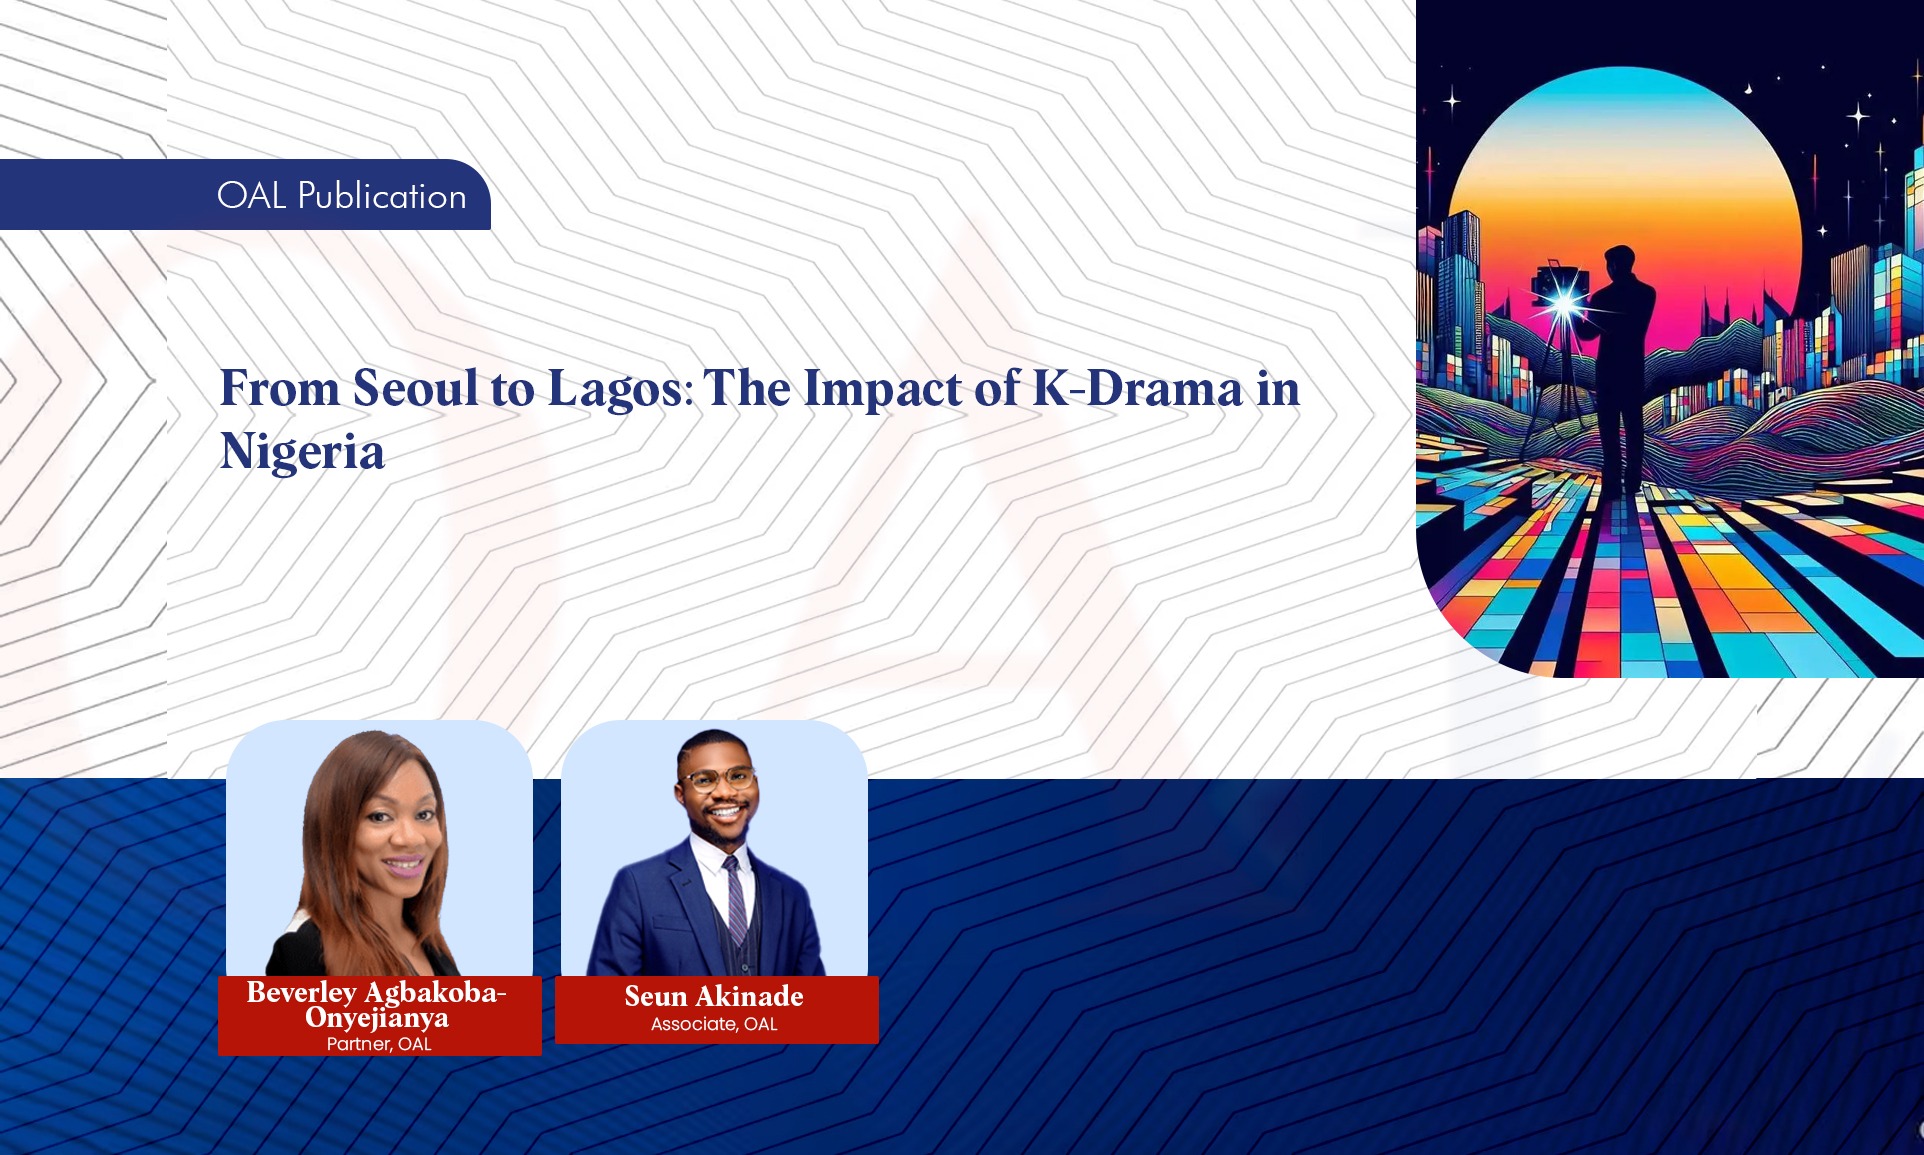 From Seoul to Lagos: The Impact of K-Drama in Nigeria